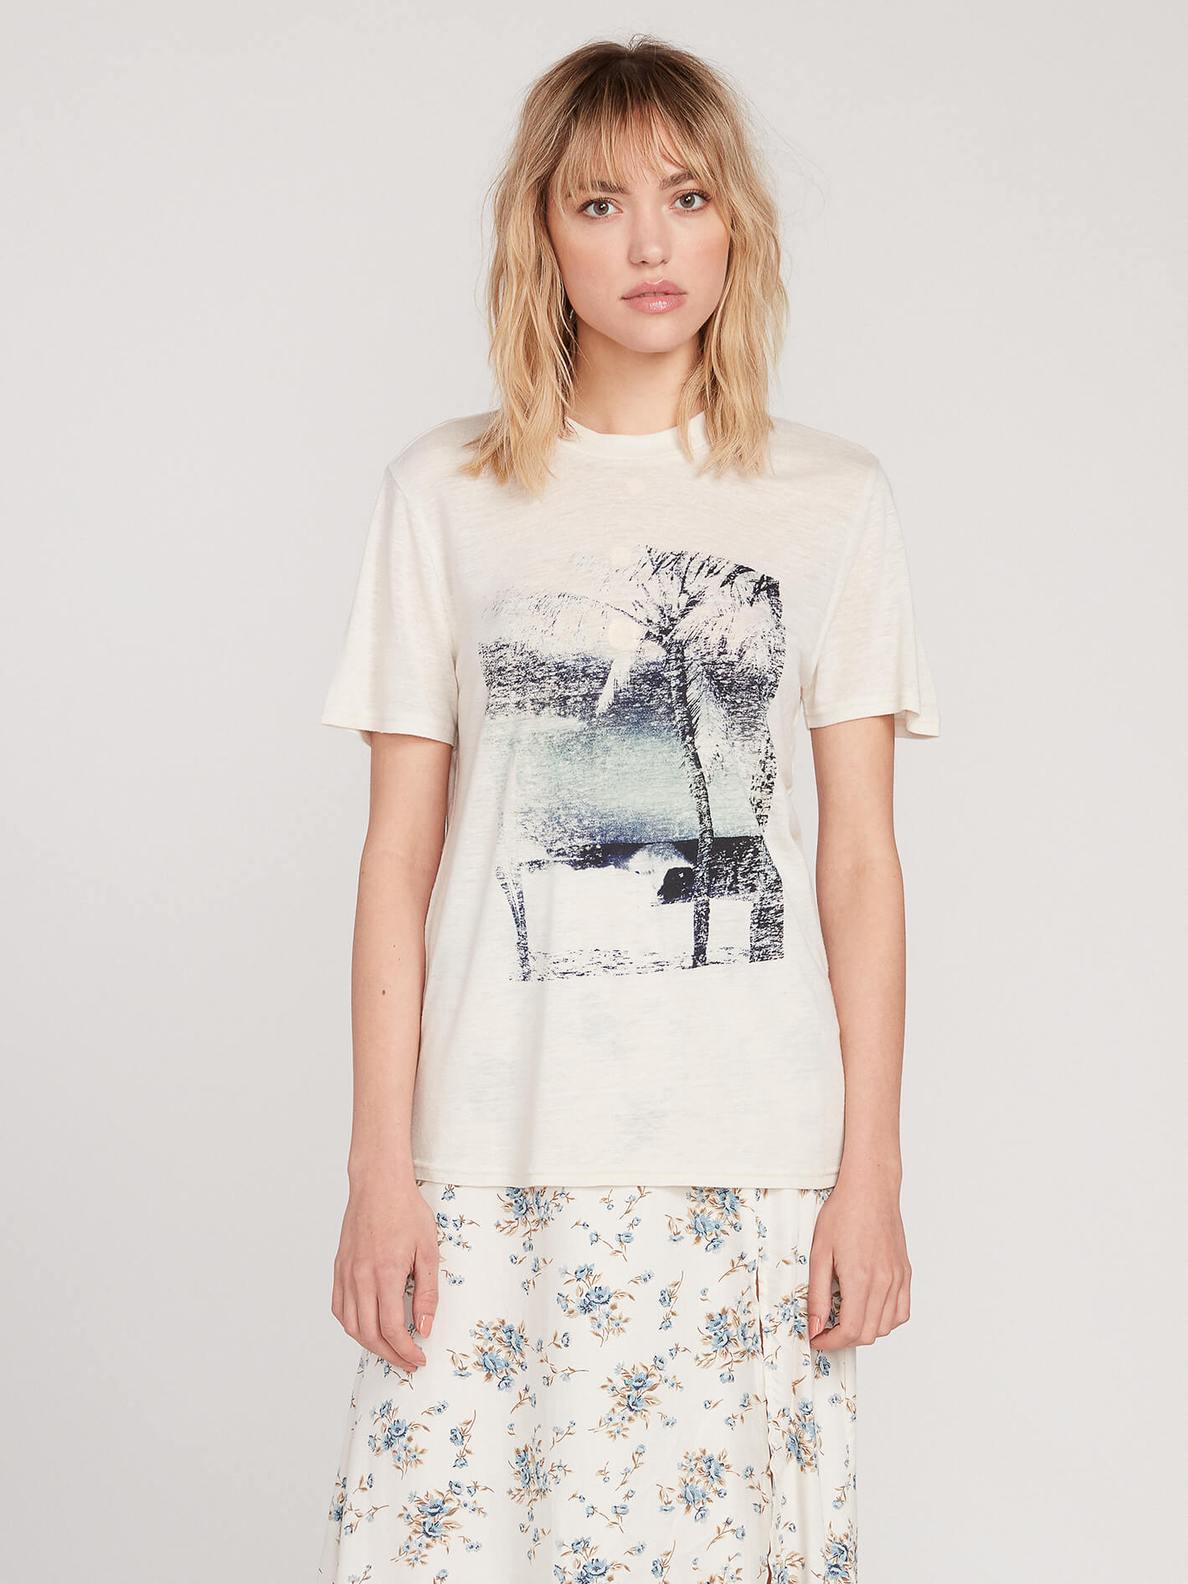 Volcom All Day Vacation T-Shirt - 88 Gear